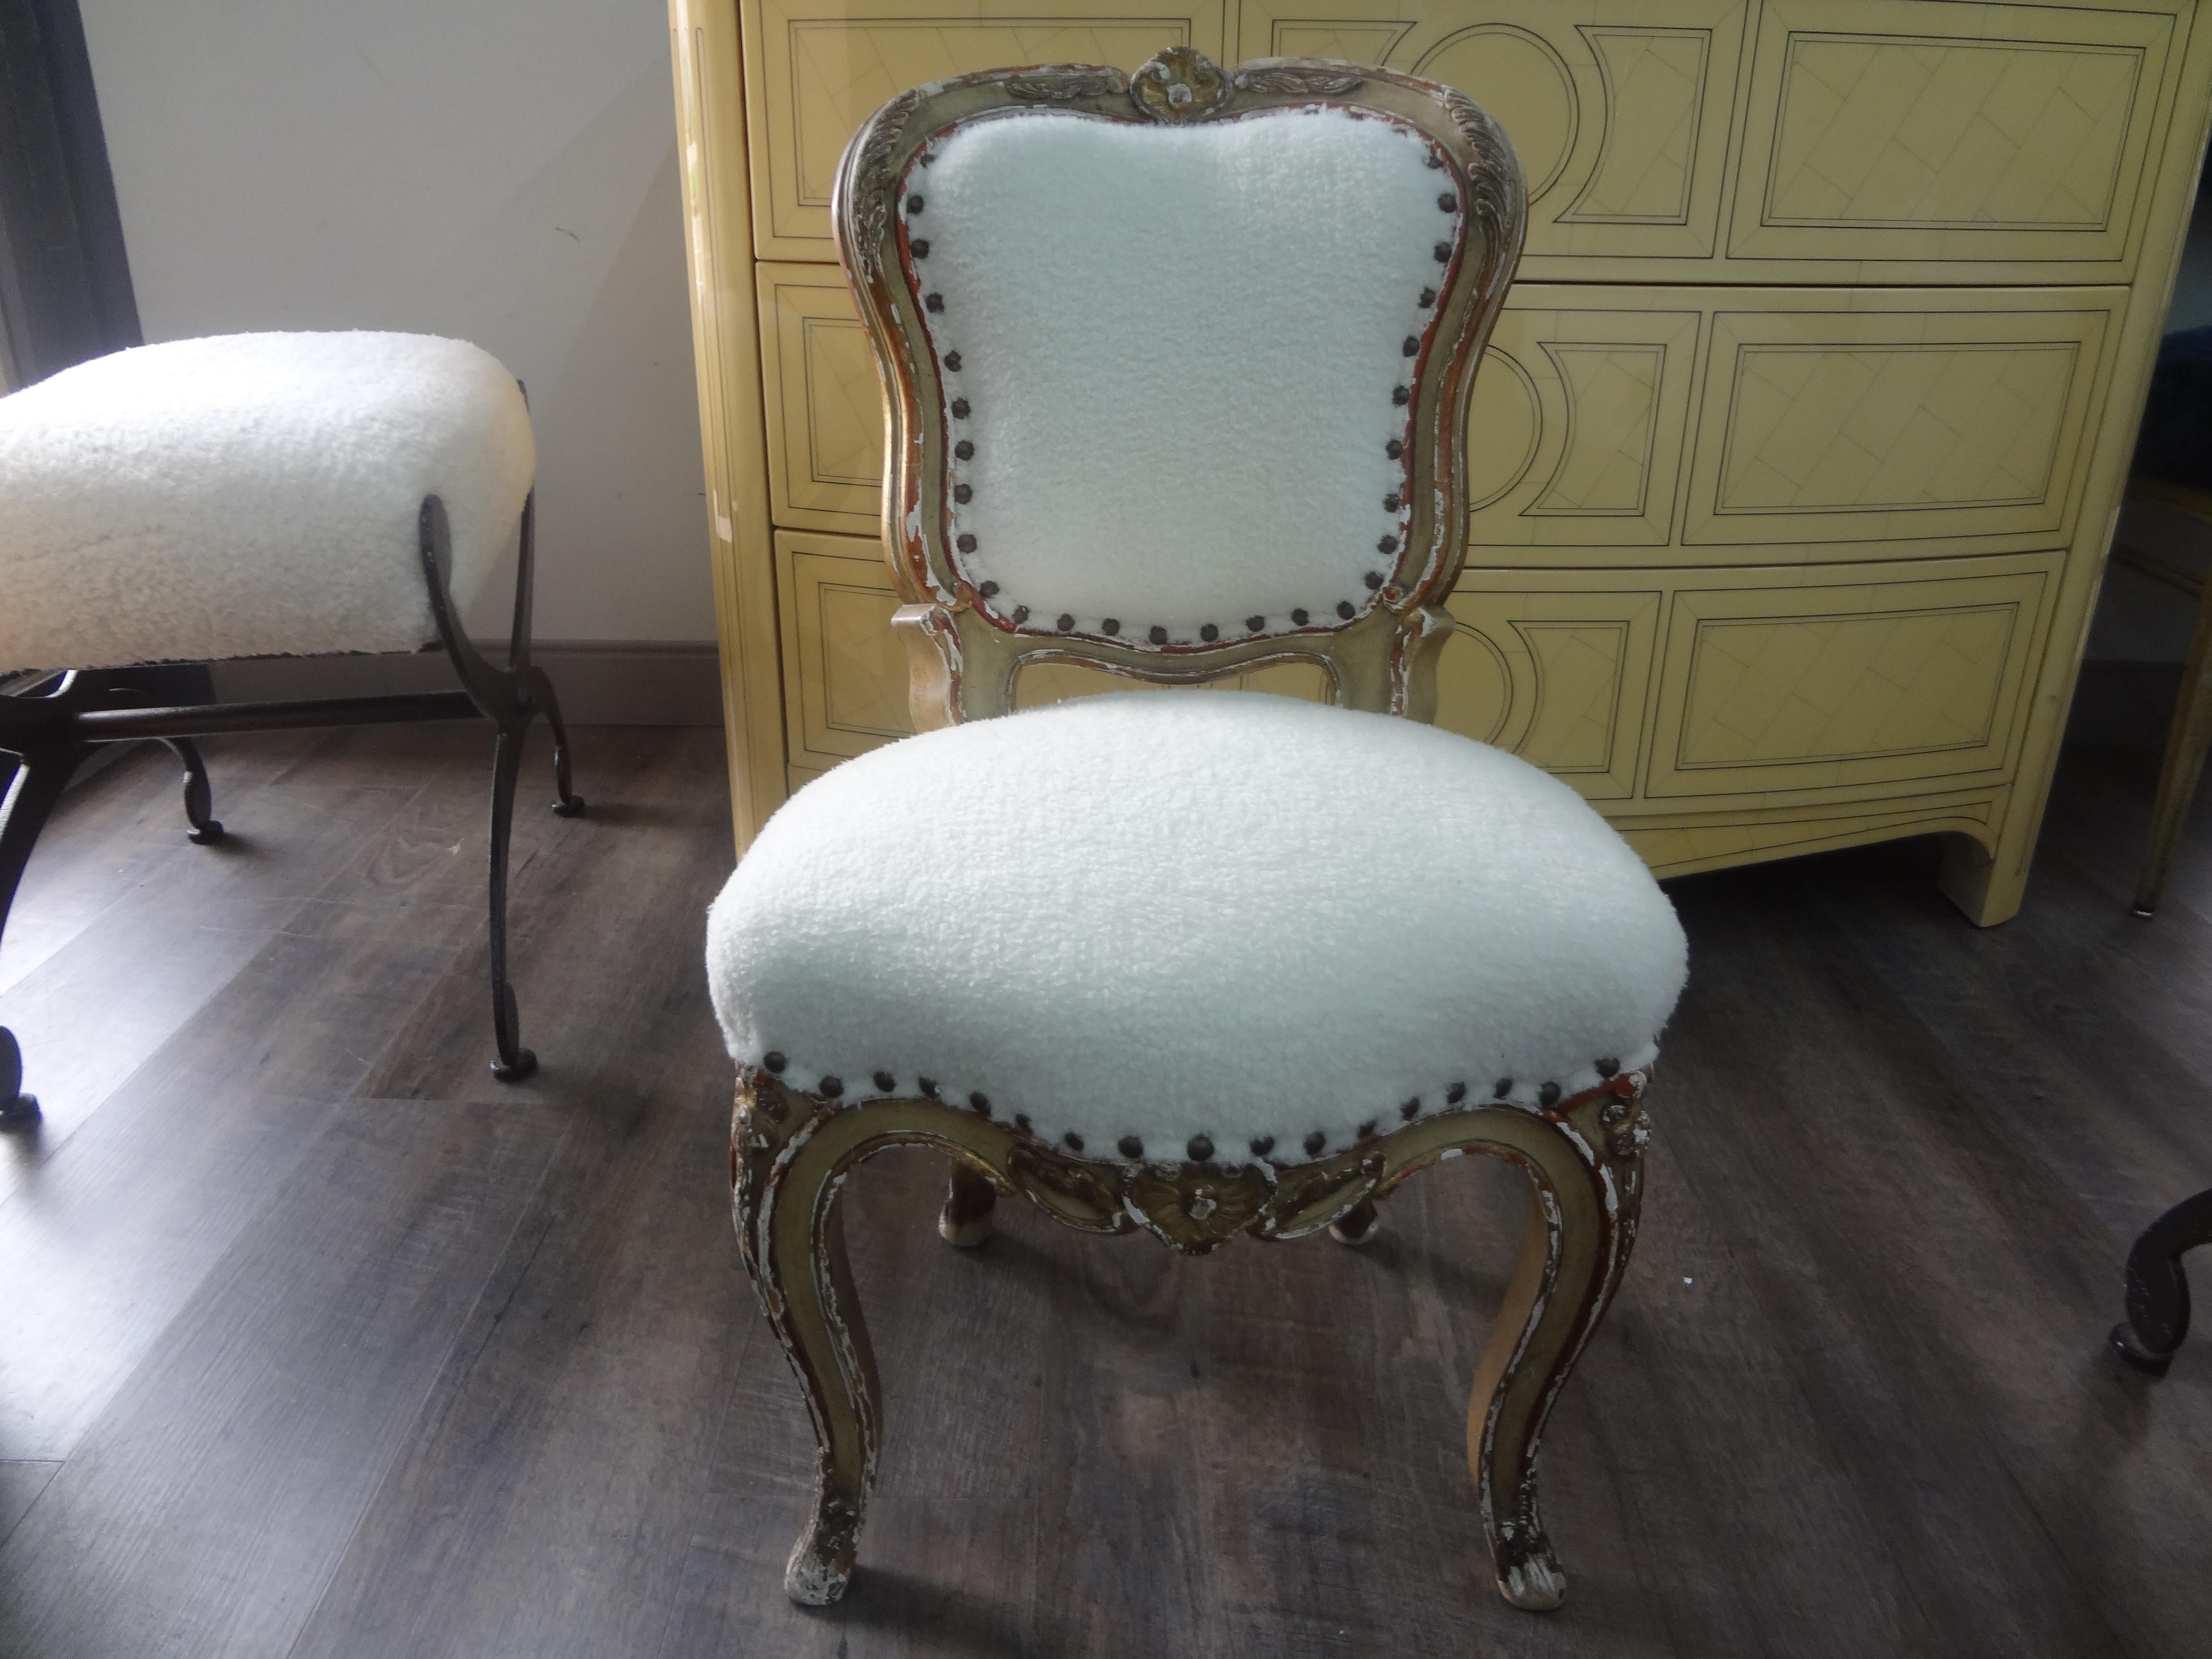 19th century French Louis XV style painted and parcel gilt children's chair.
This stunning antique French Louis XV style painted and parcel gilt children's chair has been professionally upholstered in white mohair fabric with spaced brass nail head